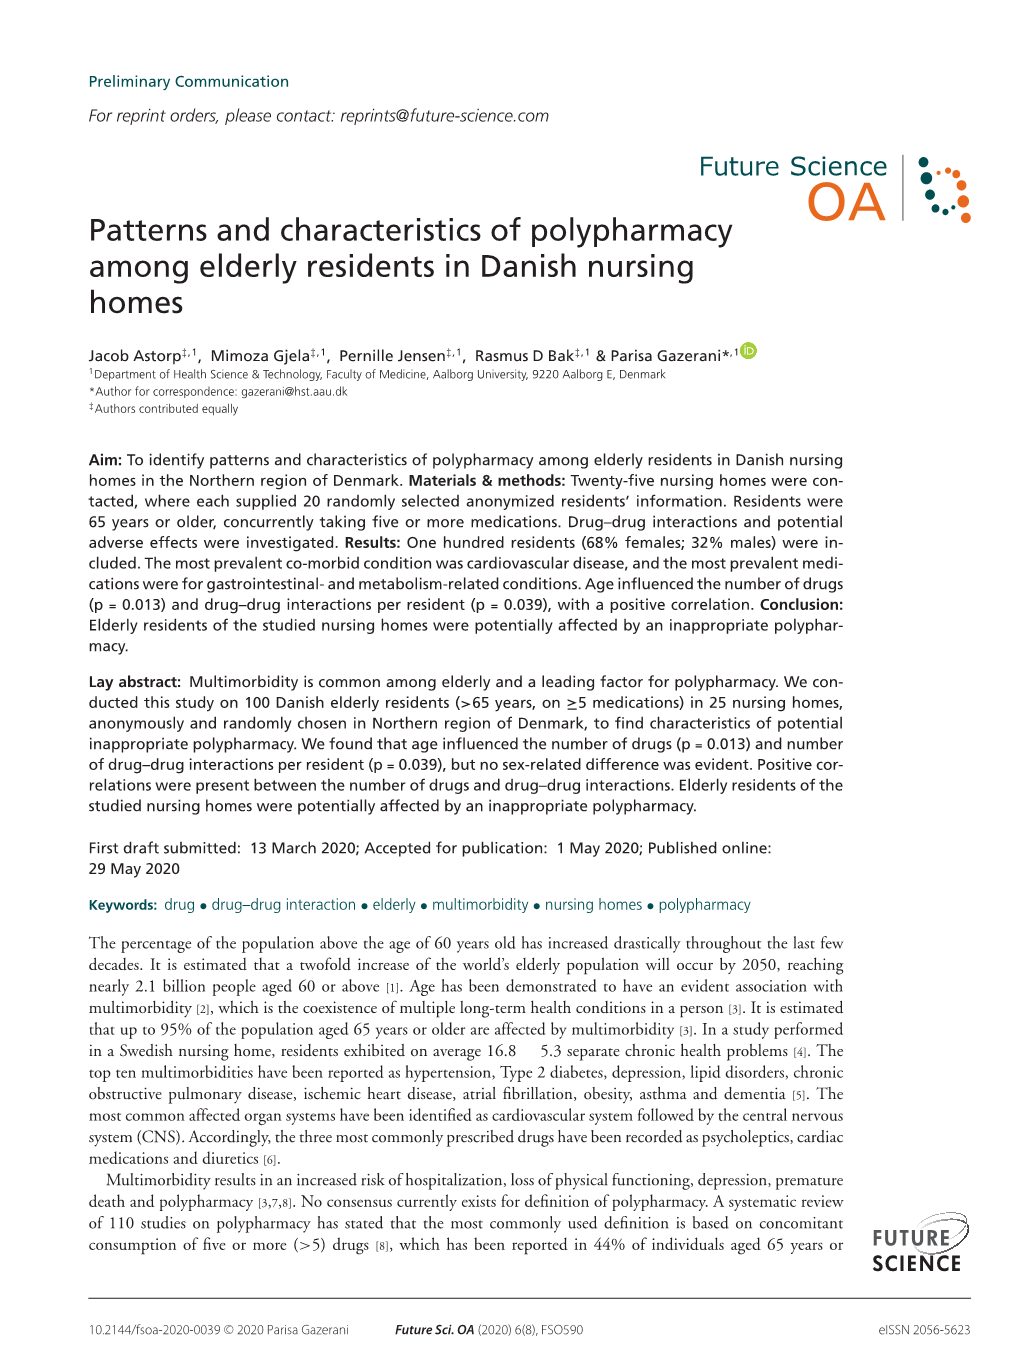 Patterns and Characteristics of Polypharmacy Among Elderly Residents in Danish Nursing Homes